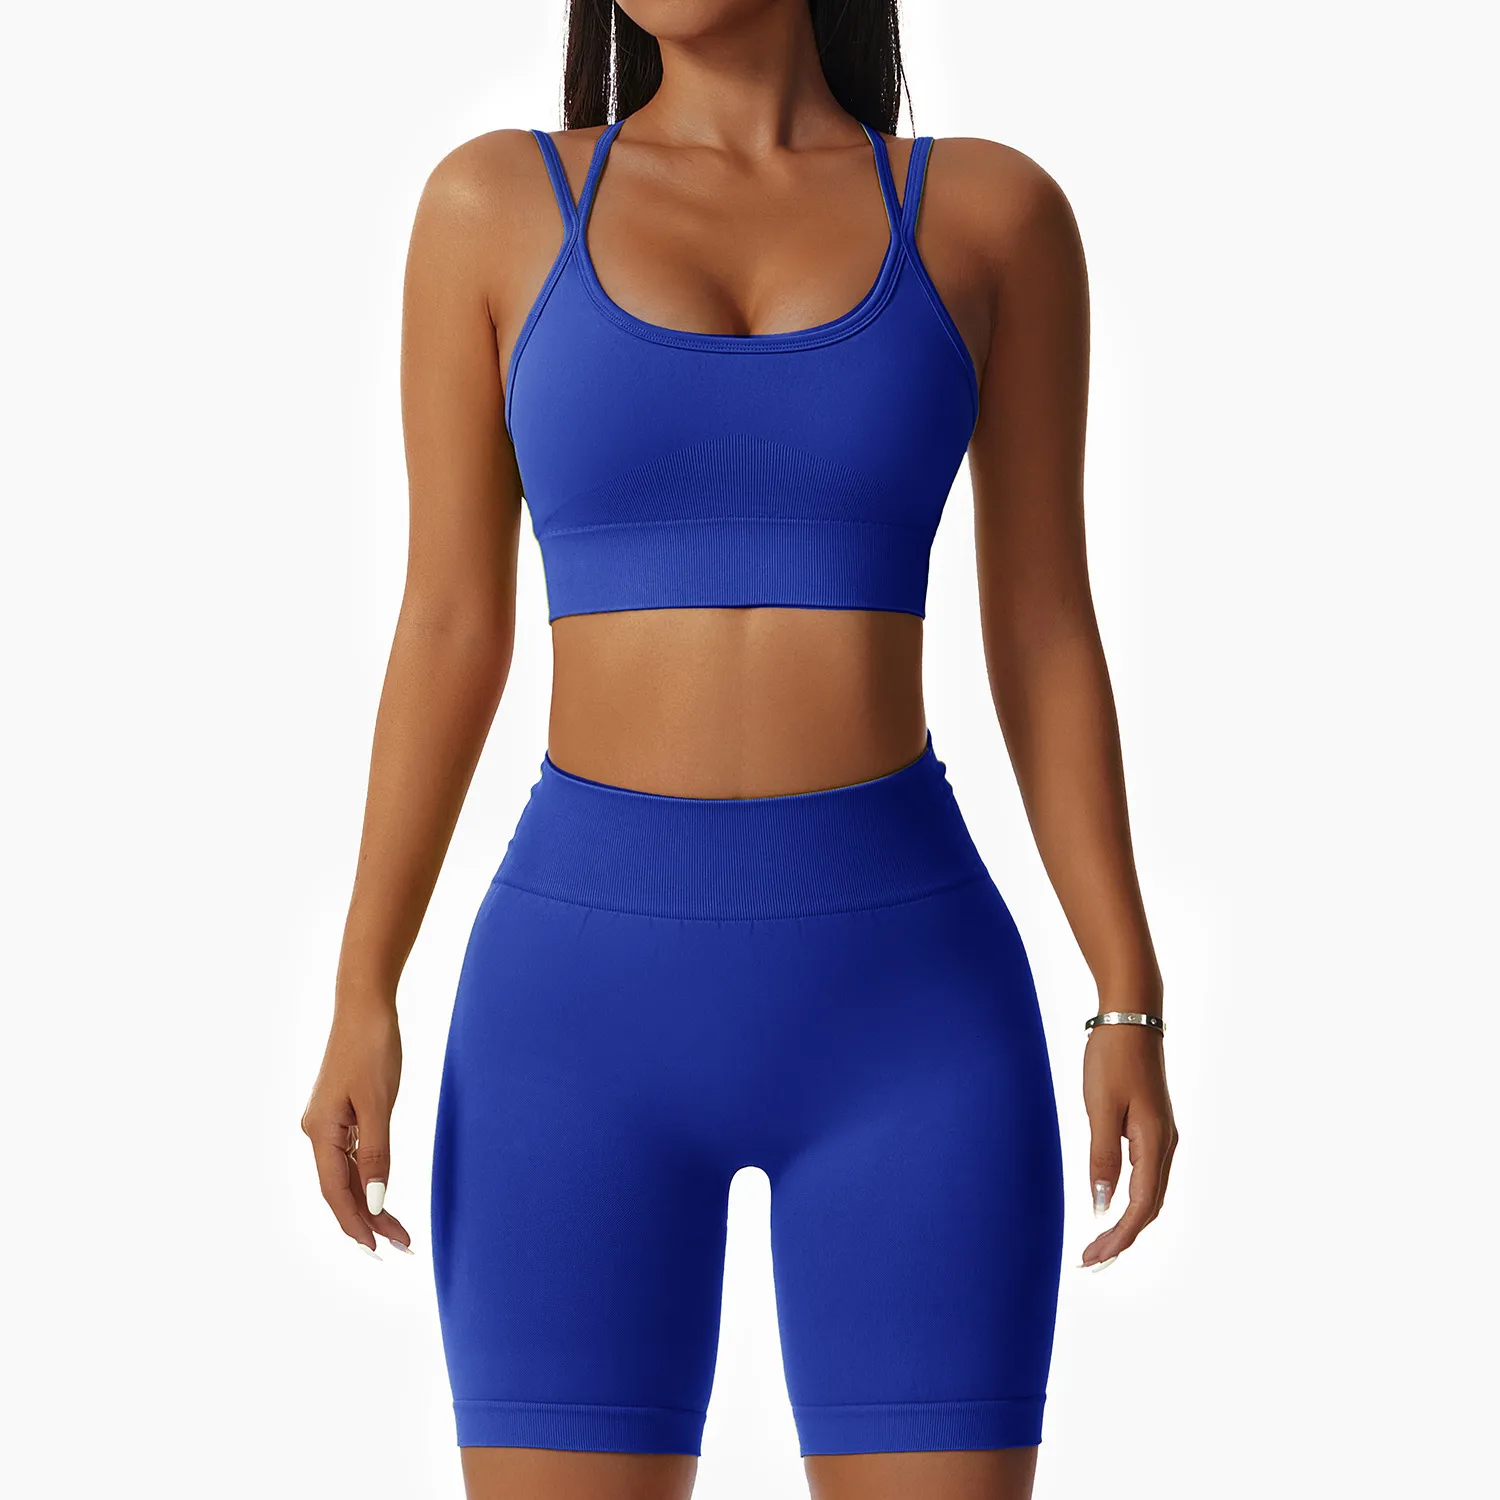 Outfits Yoga Seamless Yoga Set 2 zweiteilige Set Women Training Set weibliche Fitness Outfit